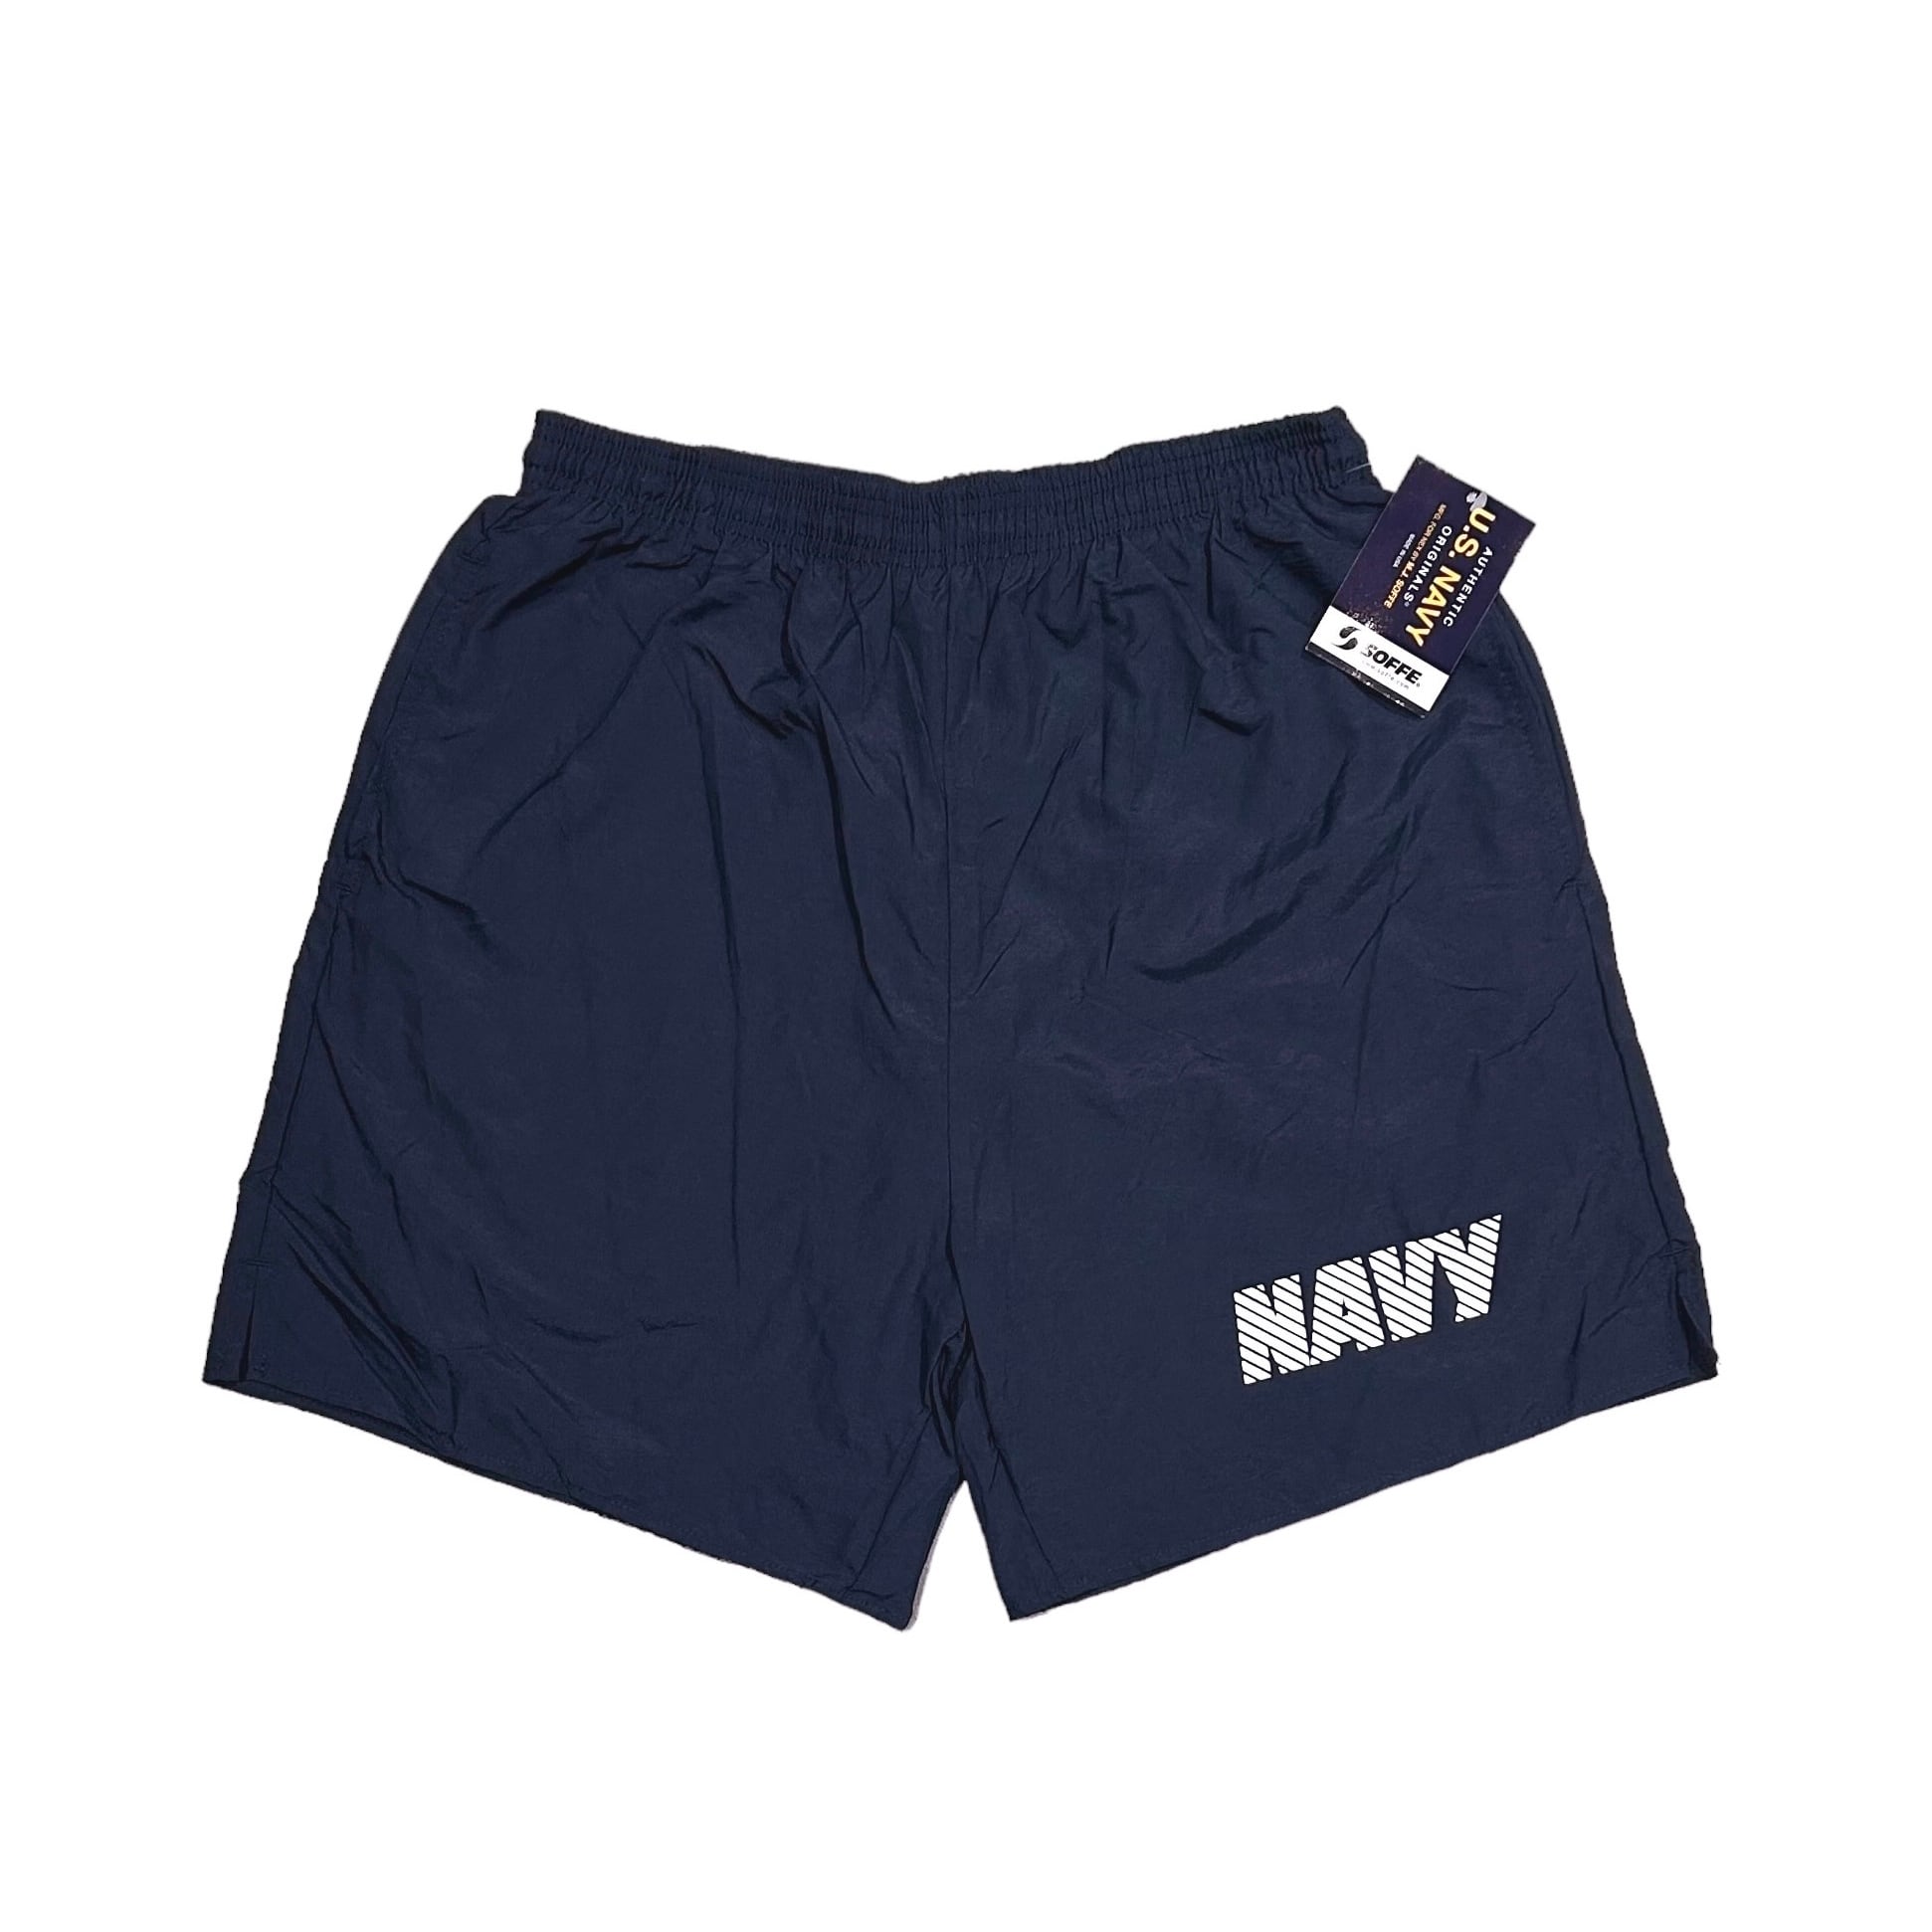 US Navy Official Training Shorts SOFFE - daterightstuff.com